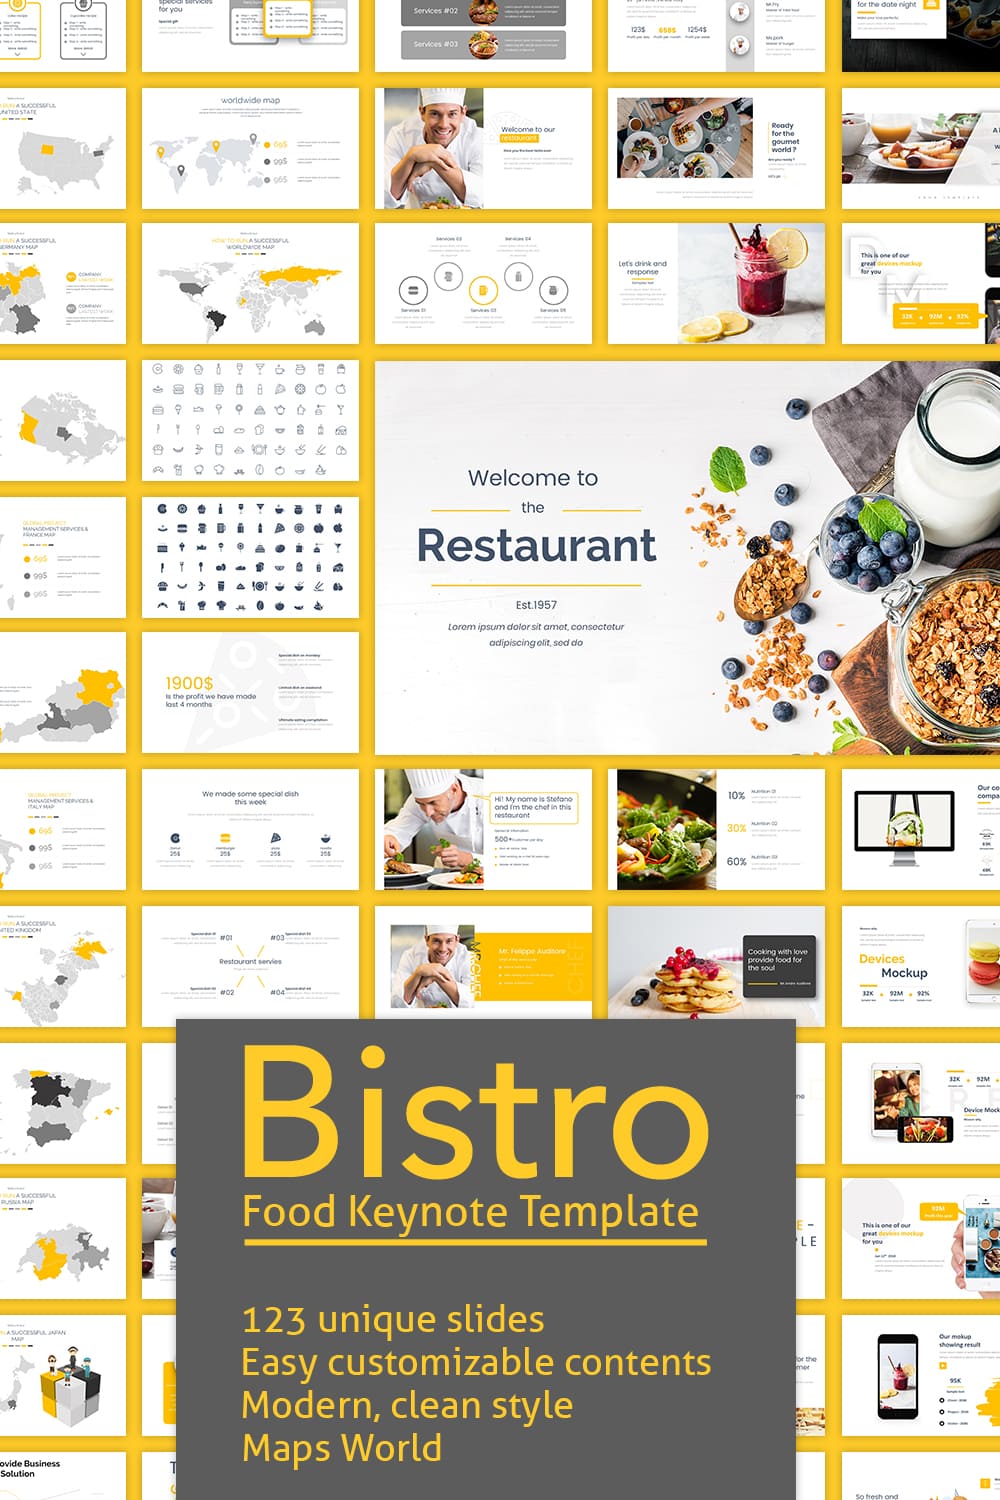 Nice simple template for restaurant topics.